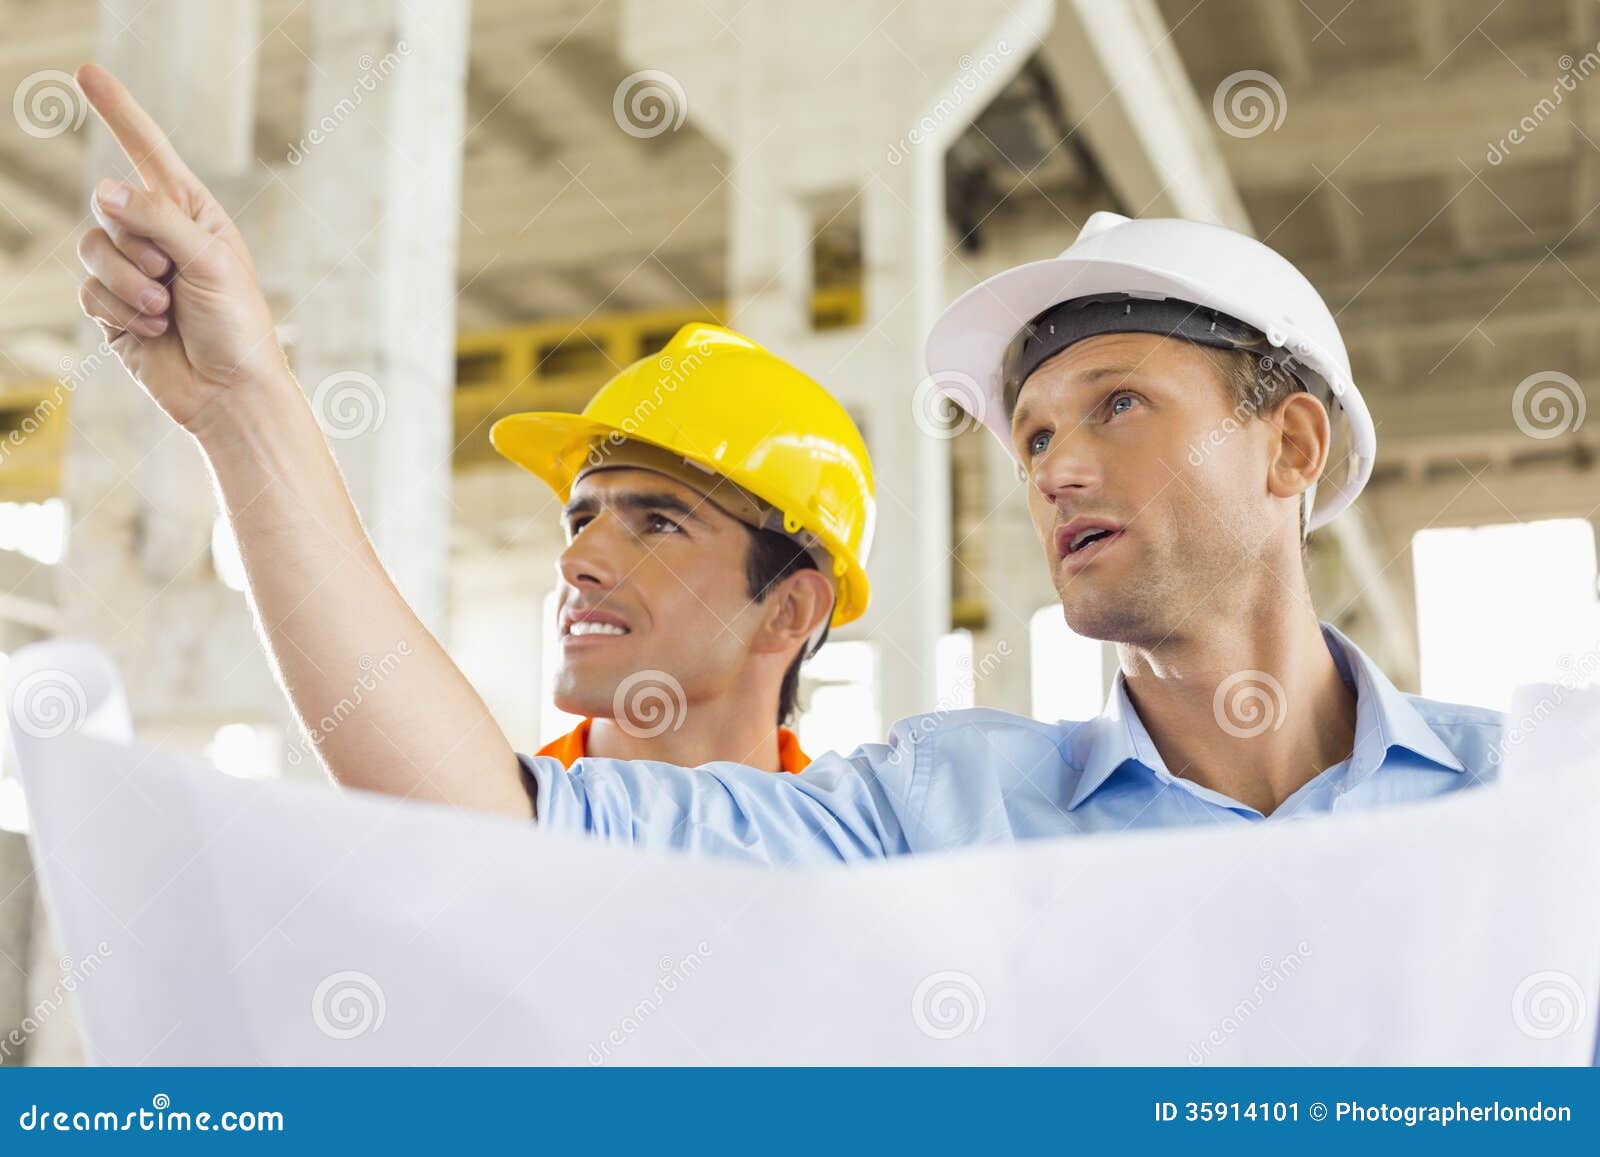 male architect explaining building plan to colleague at construction site